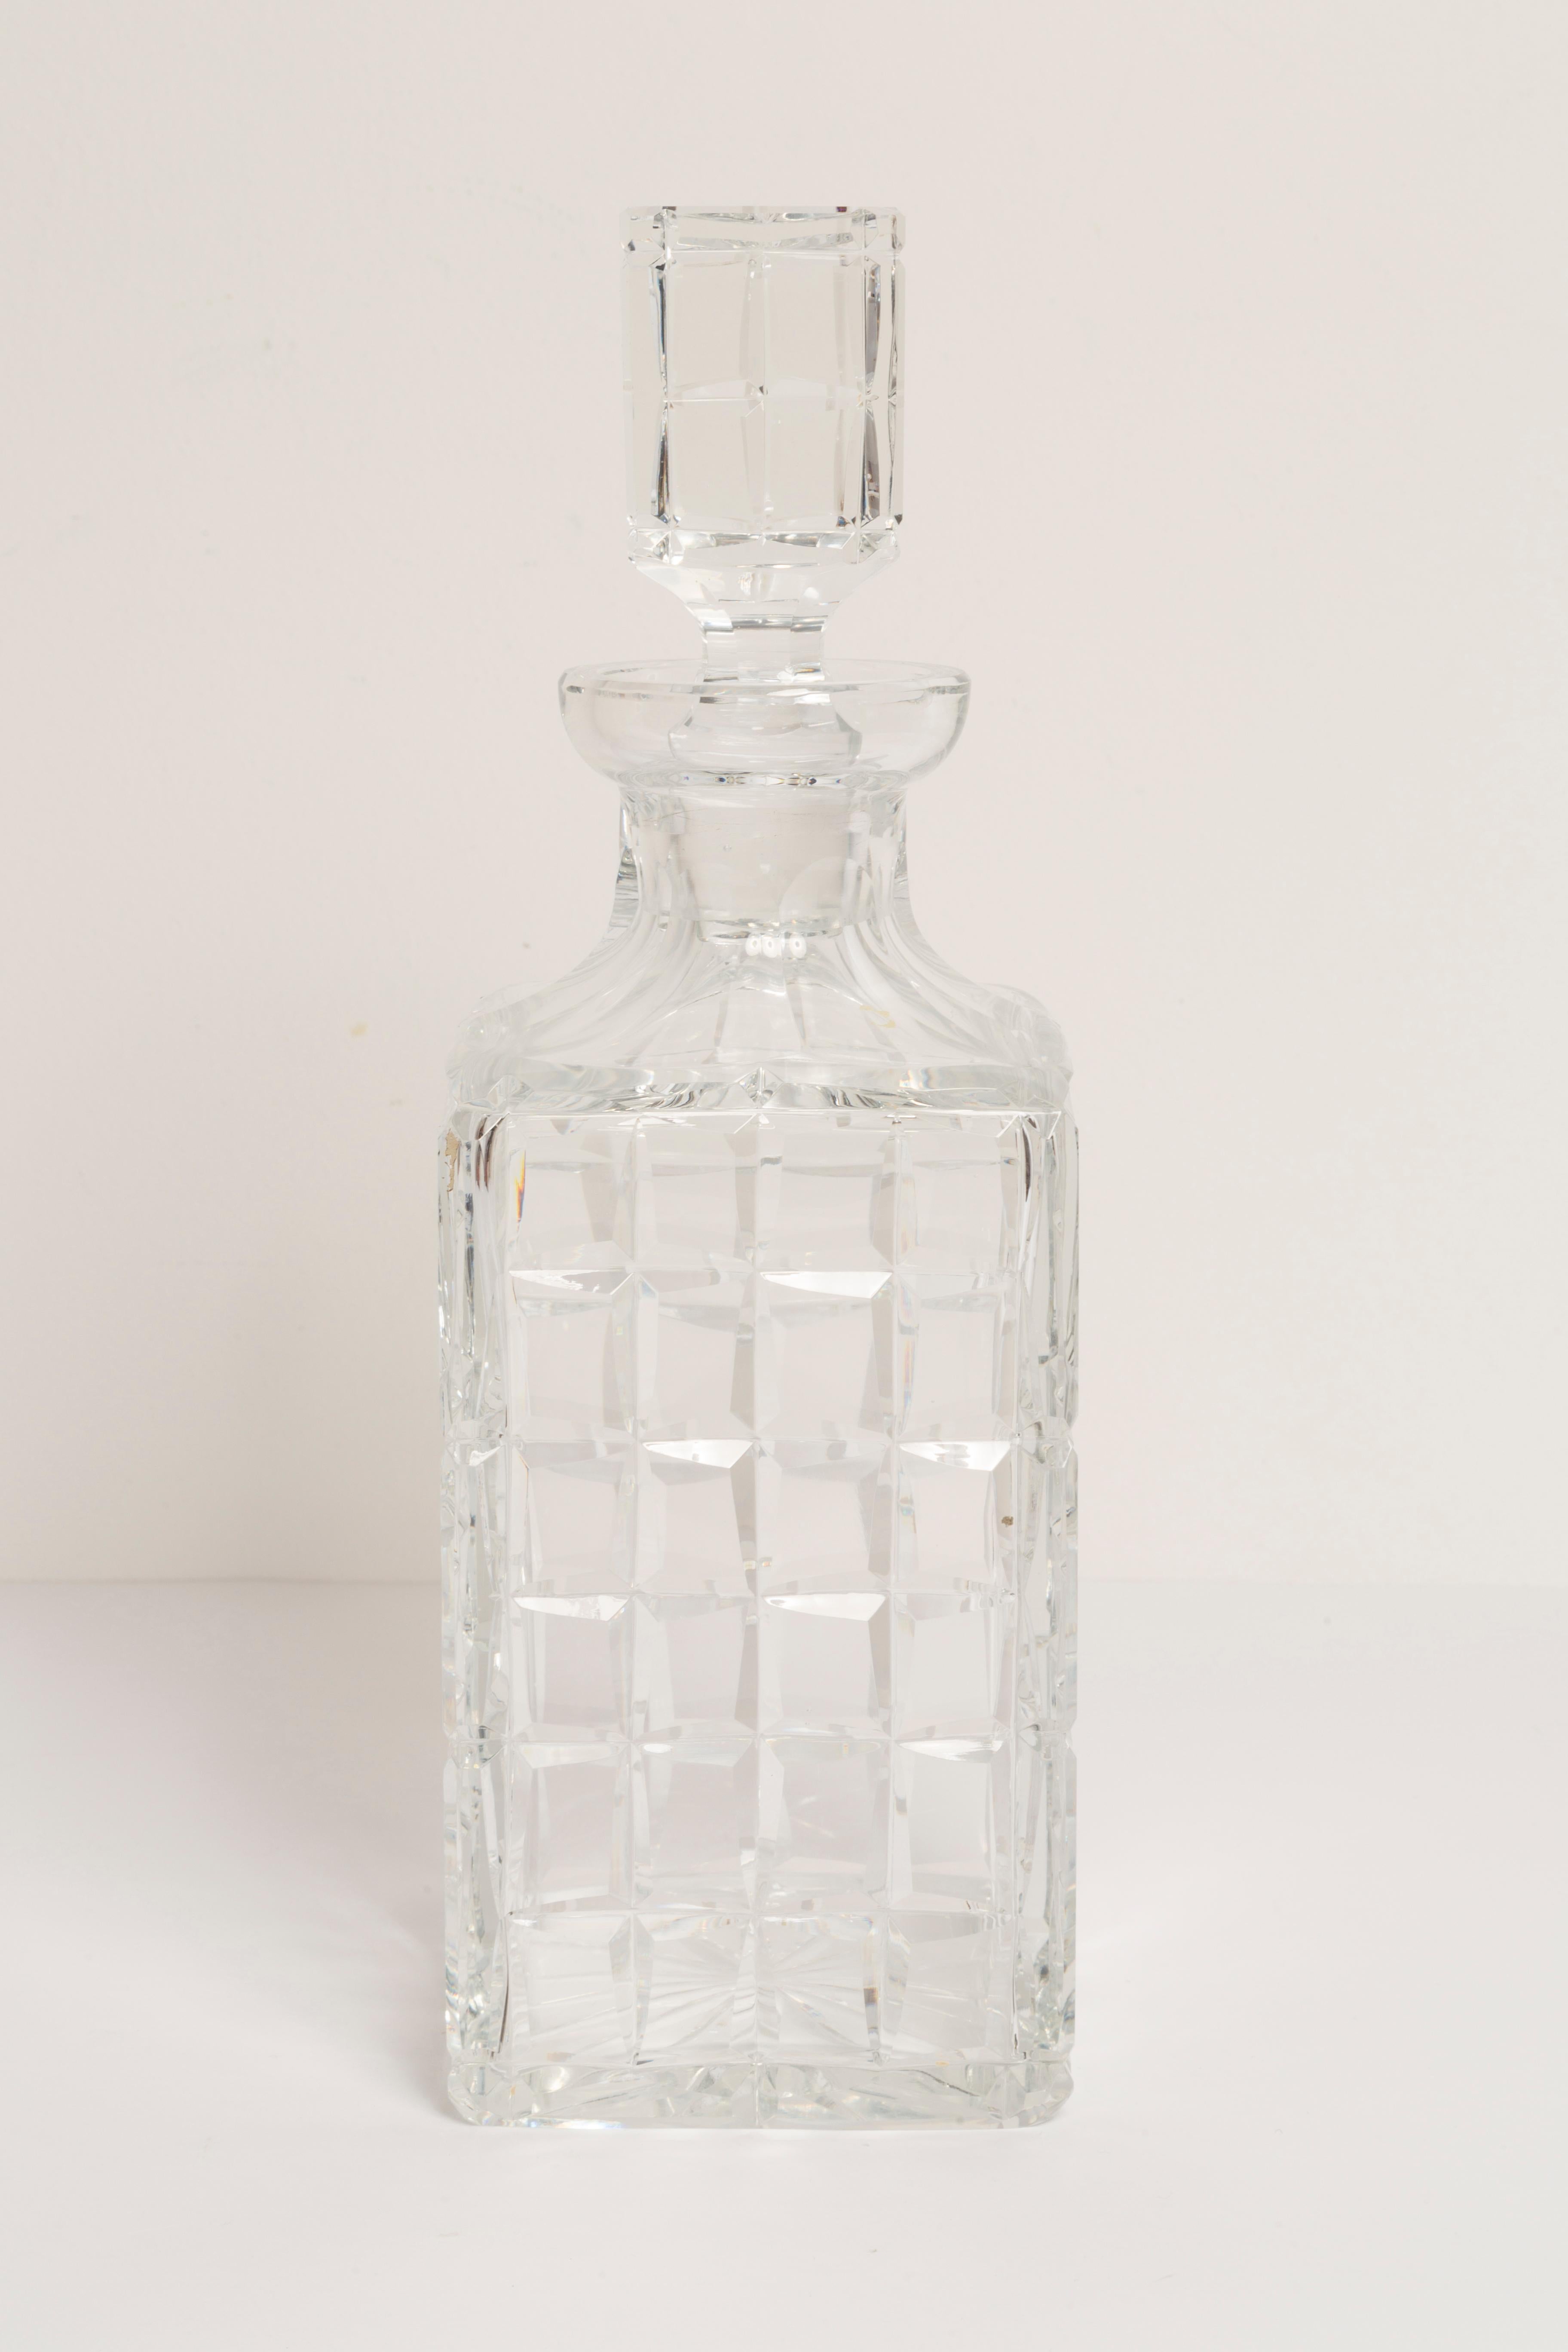 A stunning crystal transparent decanter with geometric design, made by one of the many glass manufacturers based in the region of Empoli, Italy. Would make a great addition to any collection! Very good original vintage condition. Only one unique